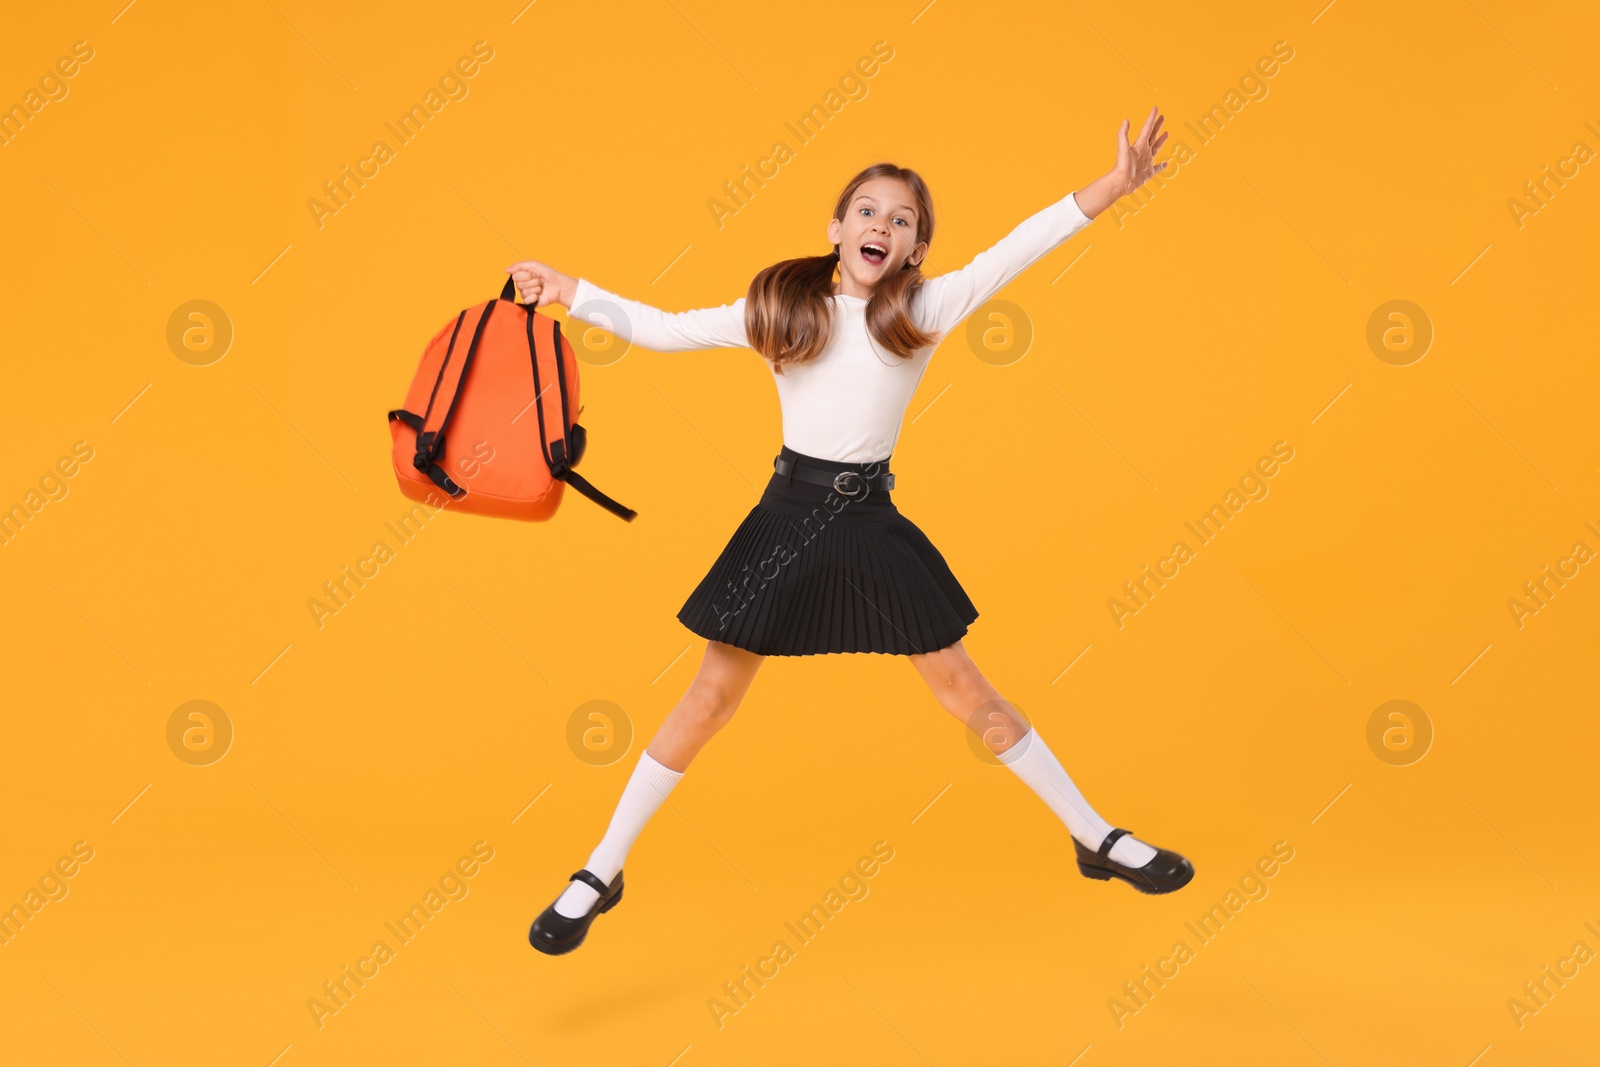 Photo of Happy schoolgirl with backpack jumping on orange background